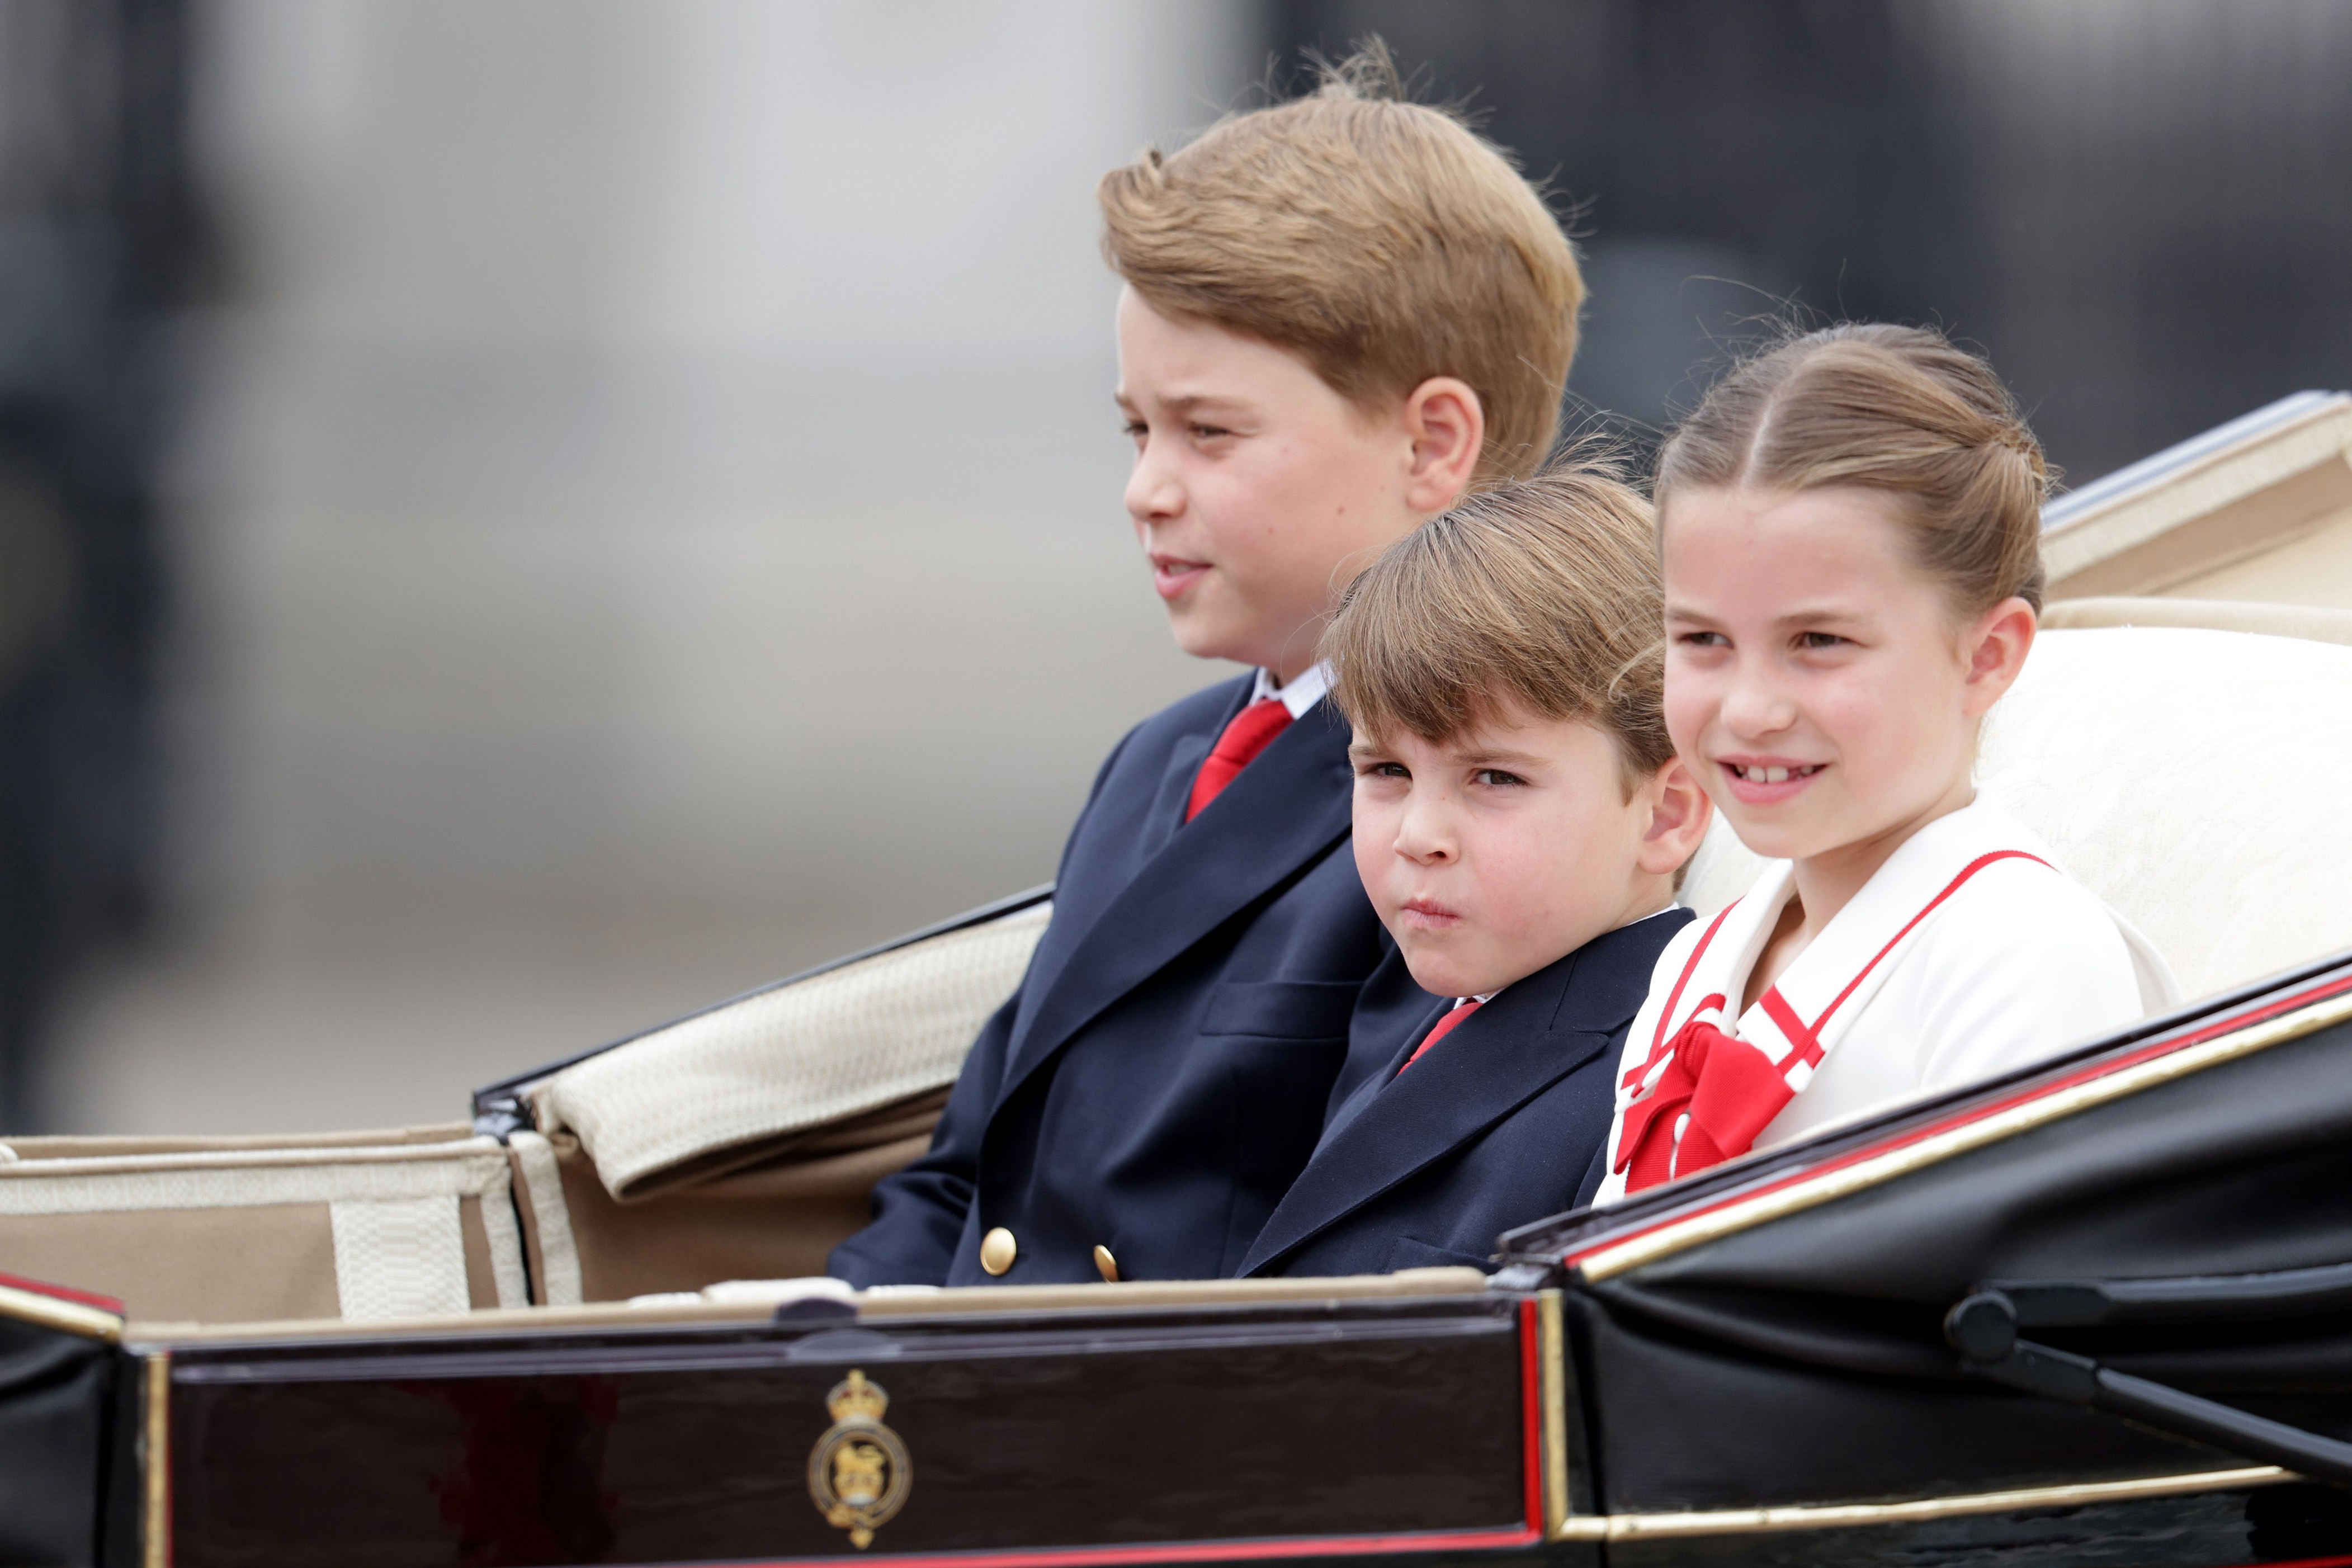 <p>Prince George, Prince Louis and Princess Charlotte rode in a carriage during <a href="https://www.wonderwall.com/celebrity/royals/trooping-the-colour-2023-king-charles-iii-celebrates-the-first-of-his-reign-752078.gallery">Trooping the Colour</a> in London on June 17, 2023.</p>